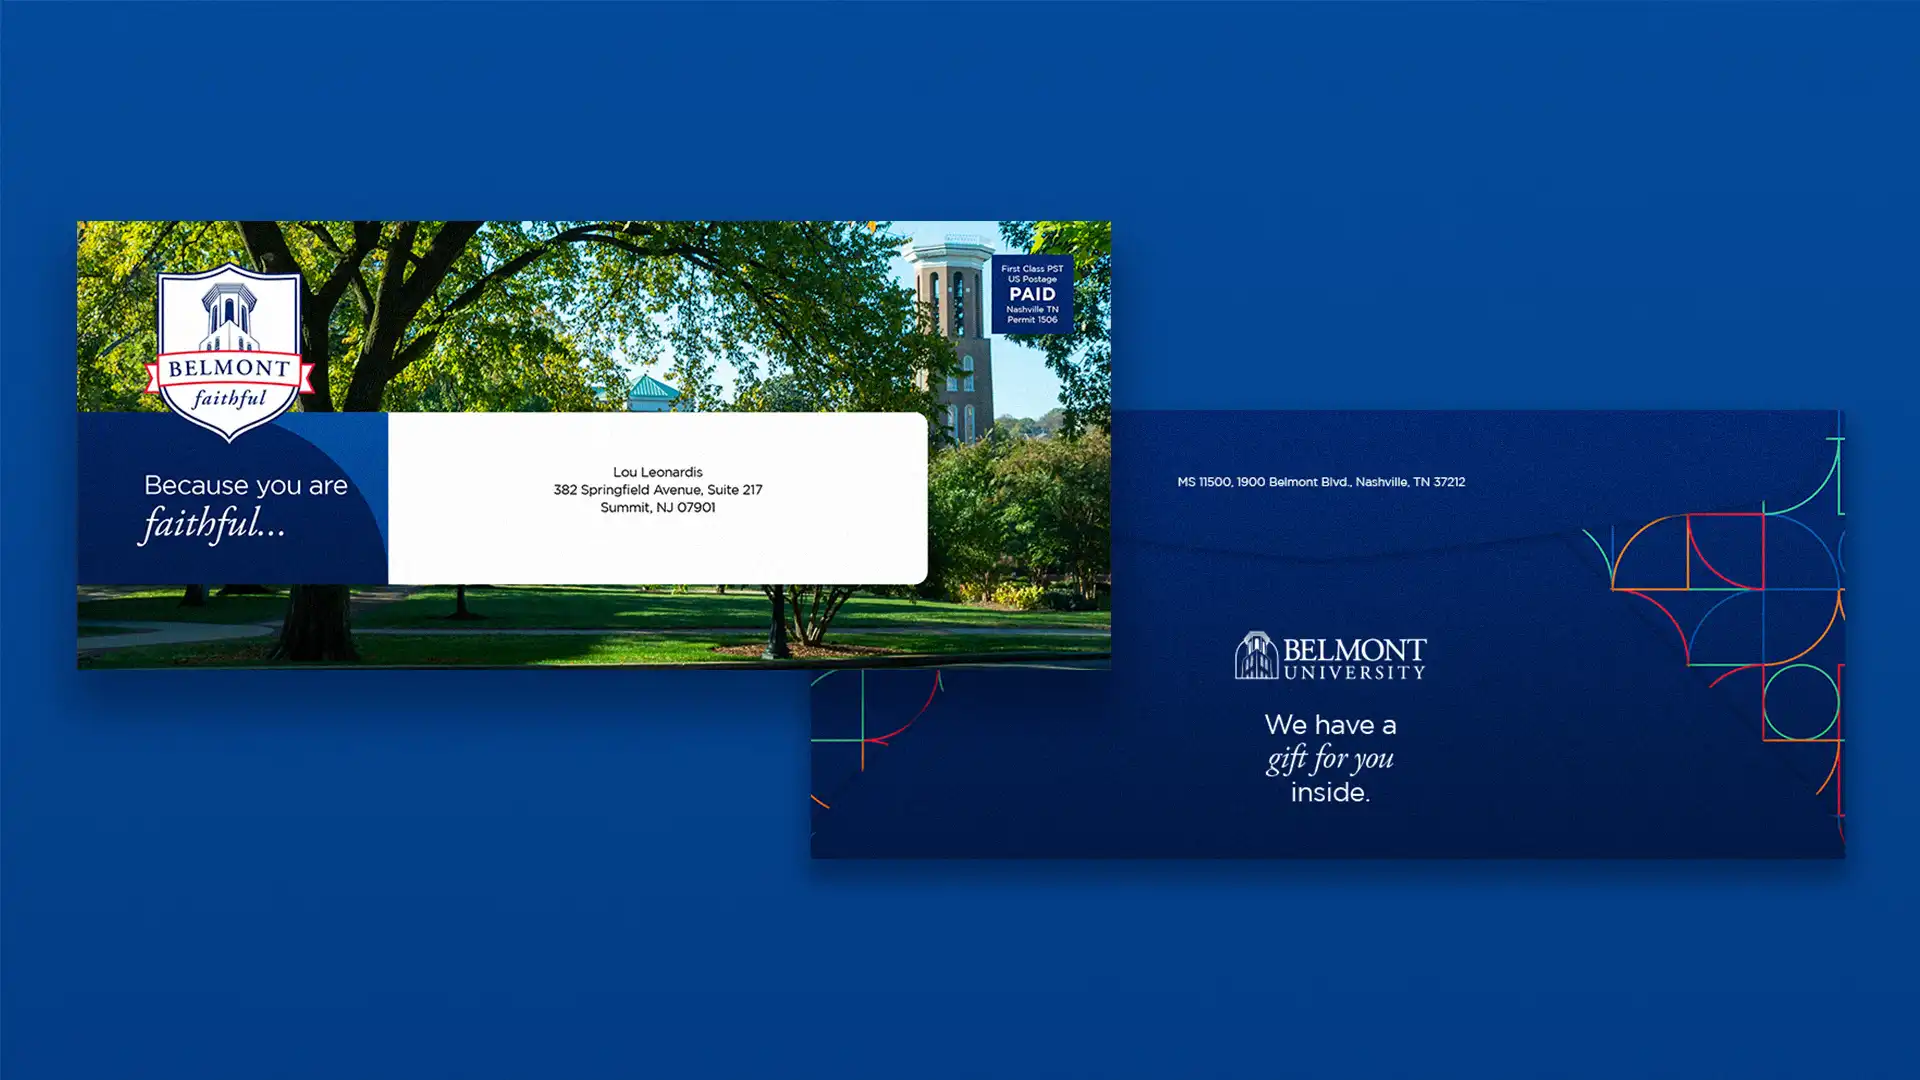 Envelope front and back for Belmont University's alumni fundraising campaign.